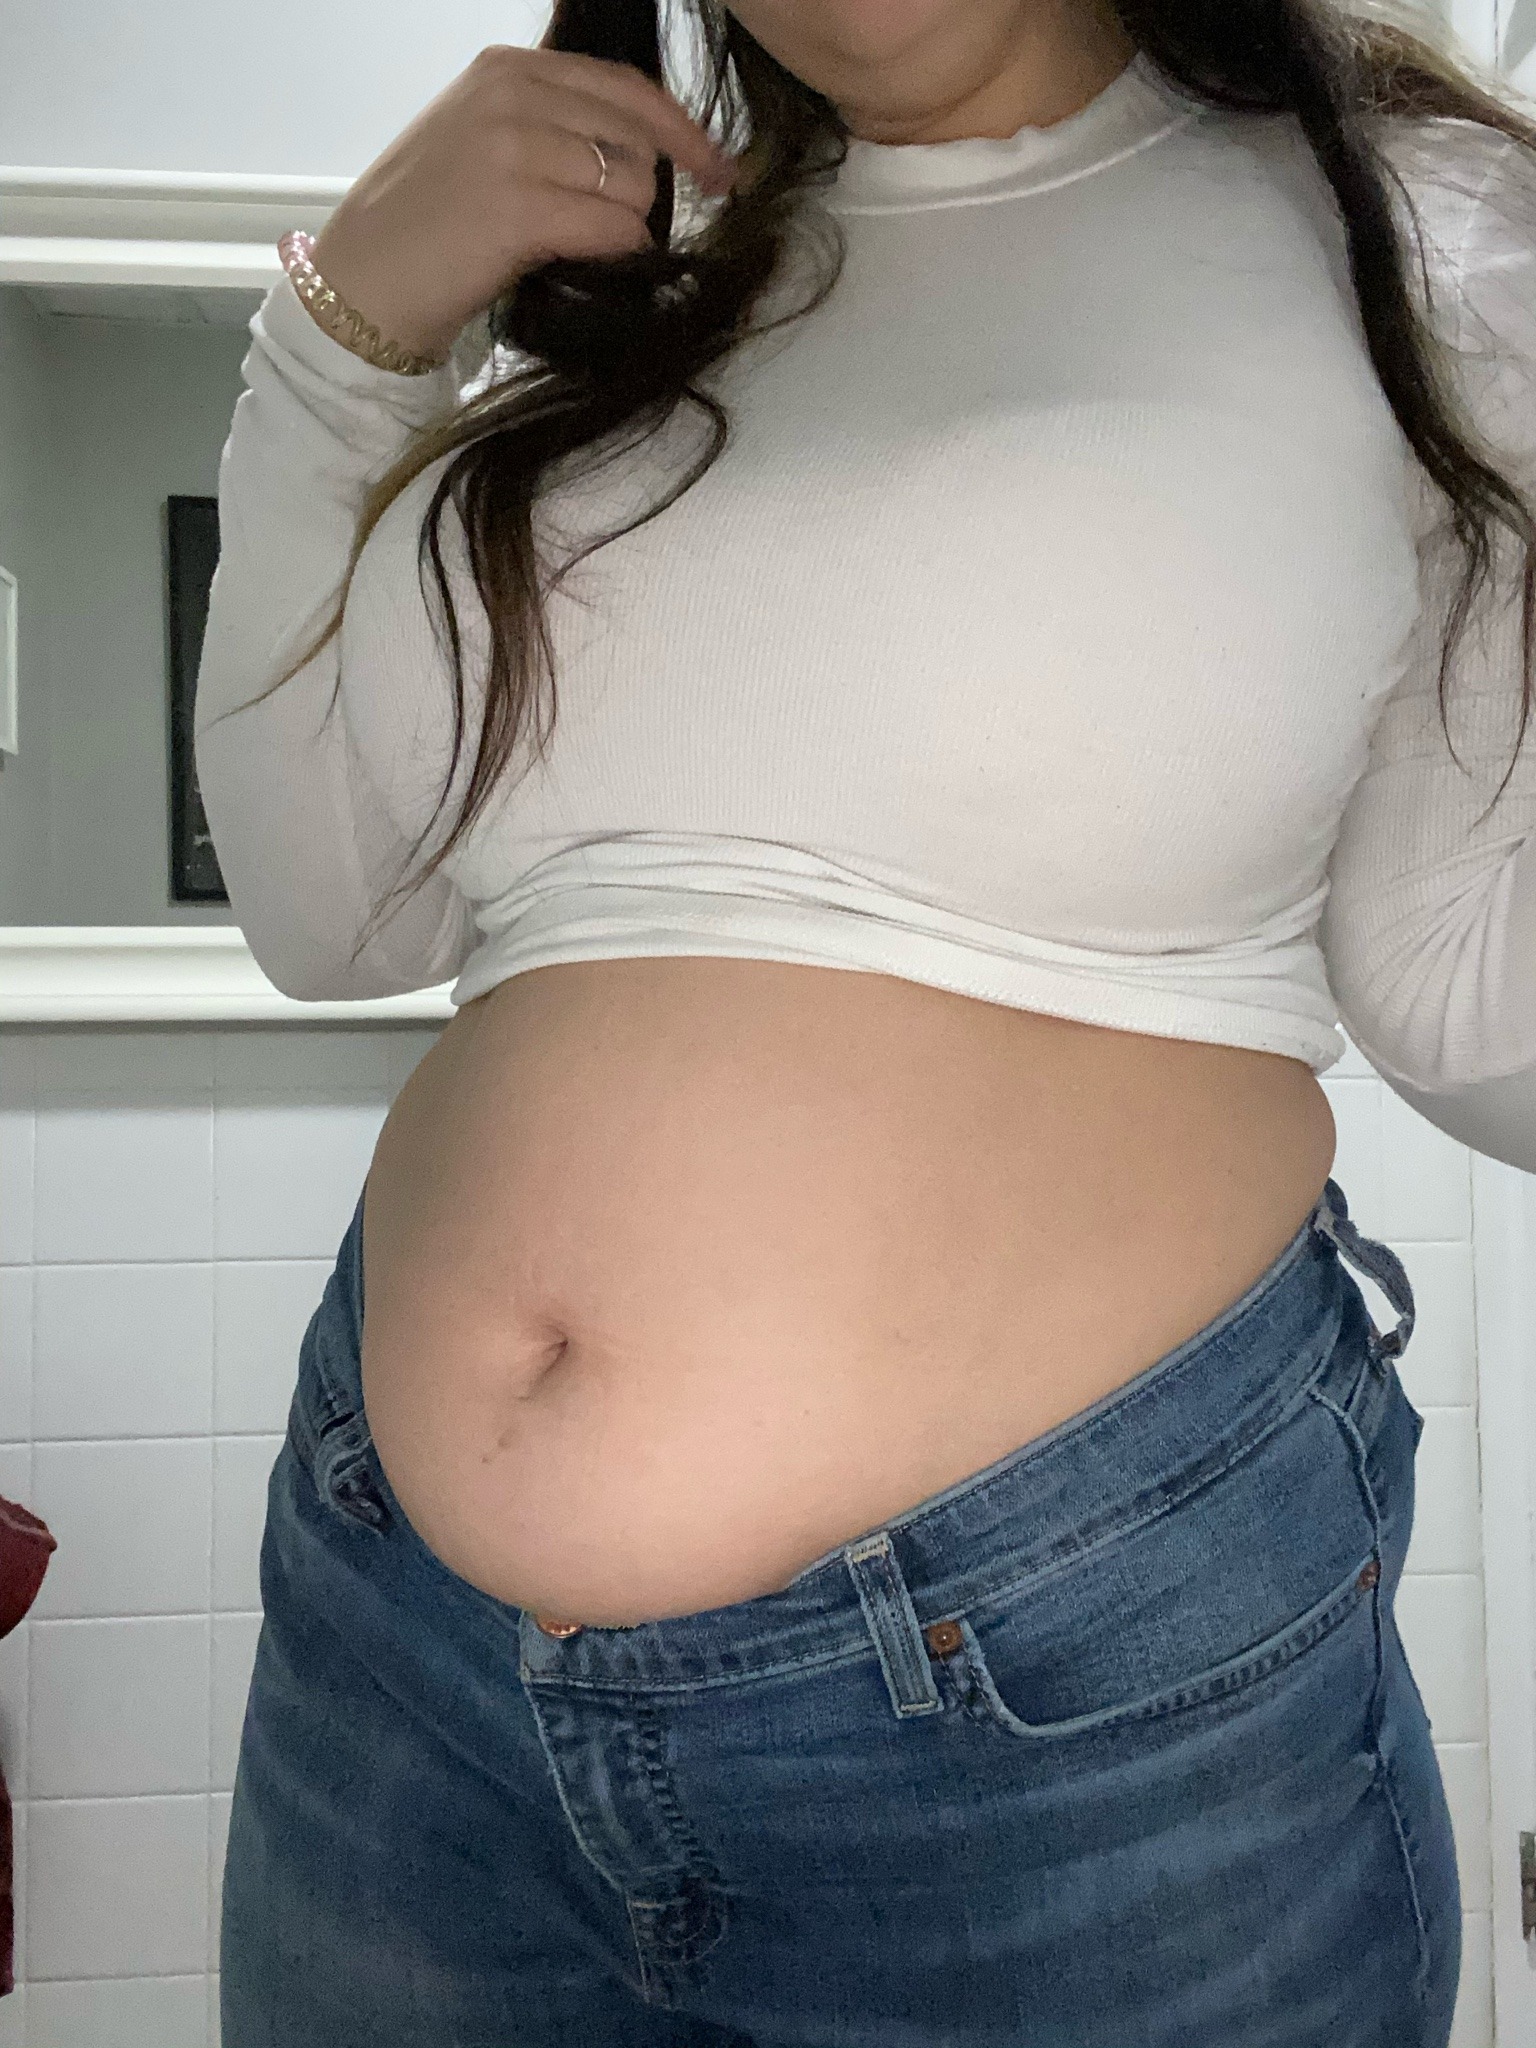 chunky-rose:An outfit my feeder will tell porn pictures